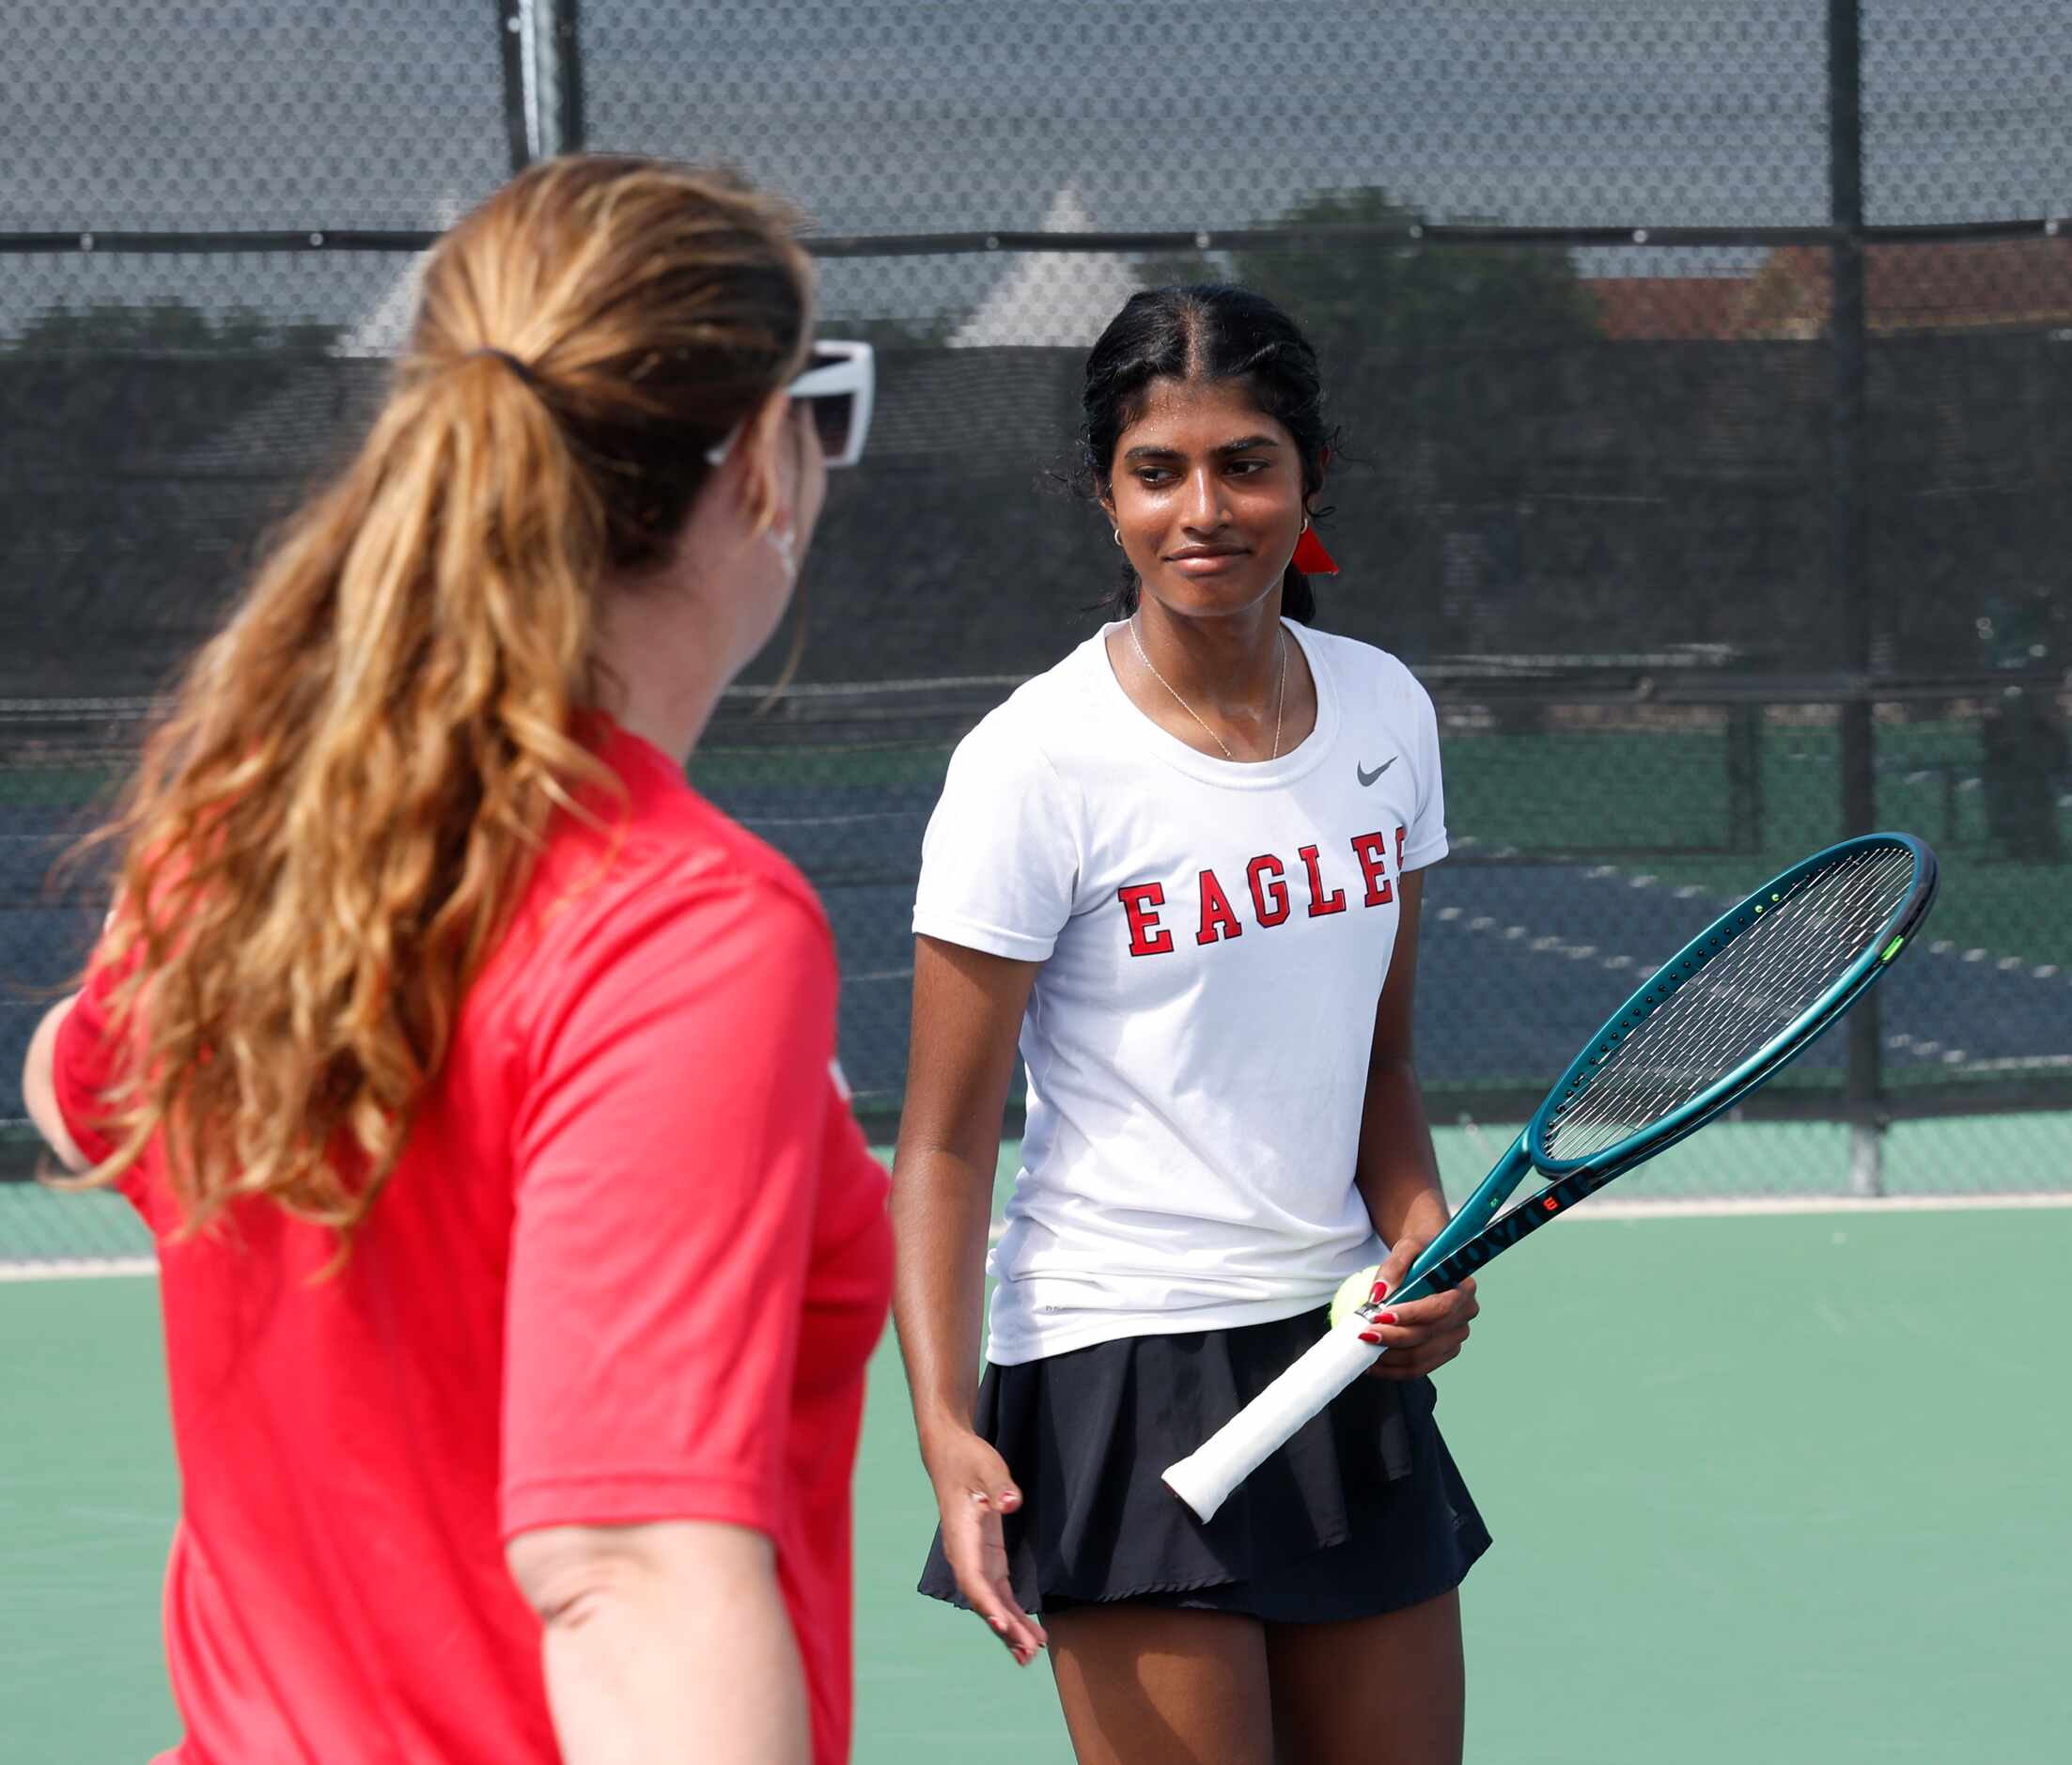 Meghna Arun Kumar, Argyle is congratulated by one of her coaches Danielle Blair after she...